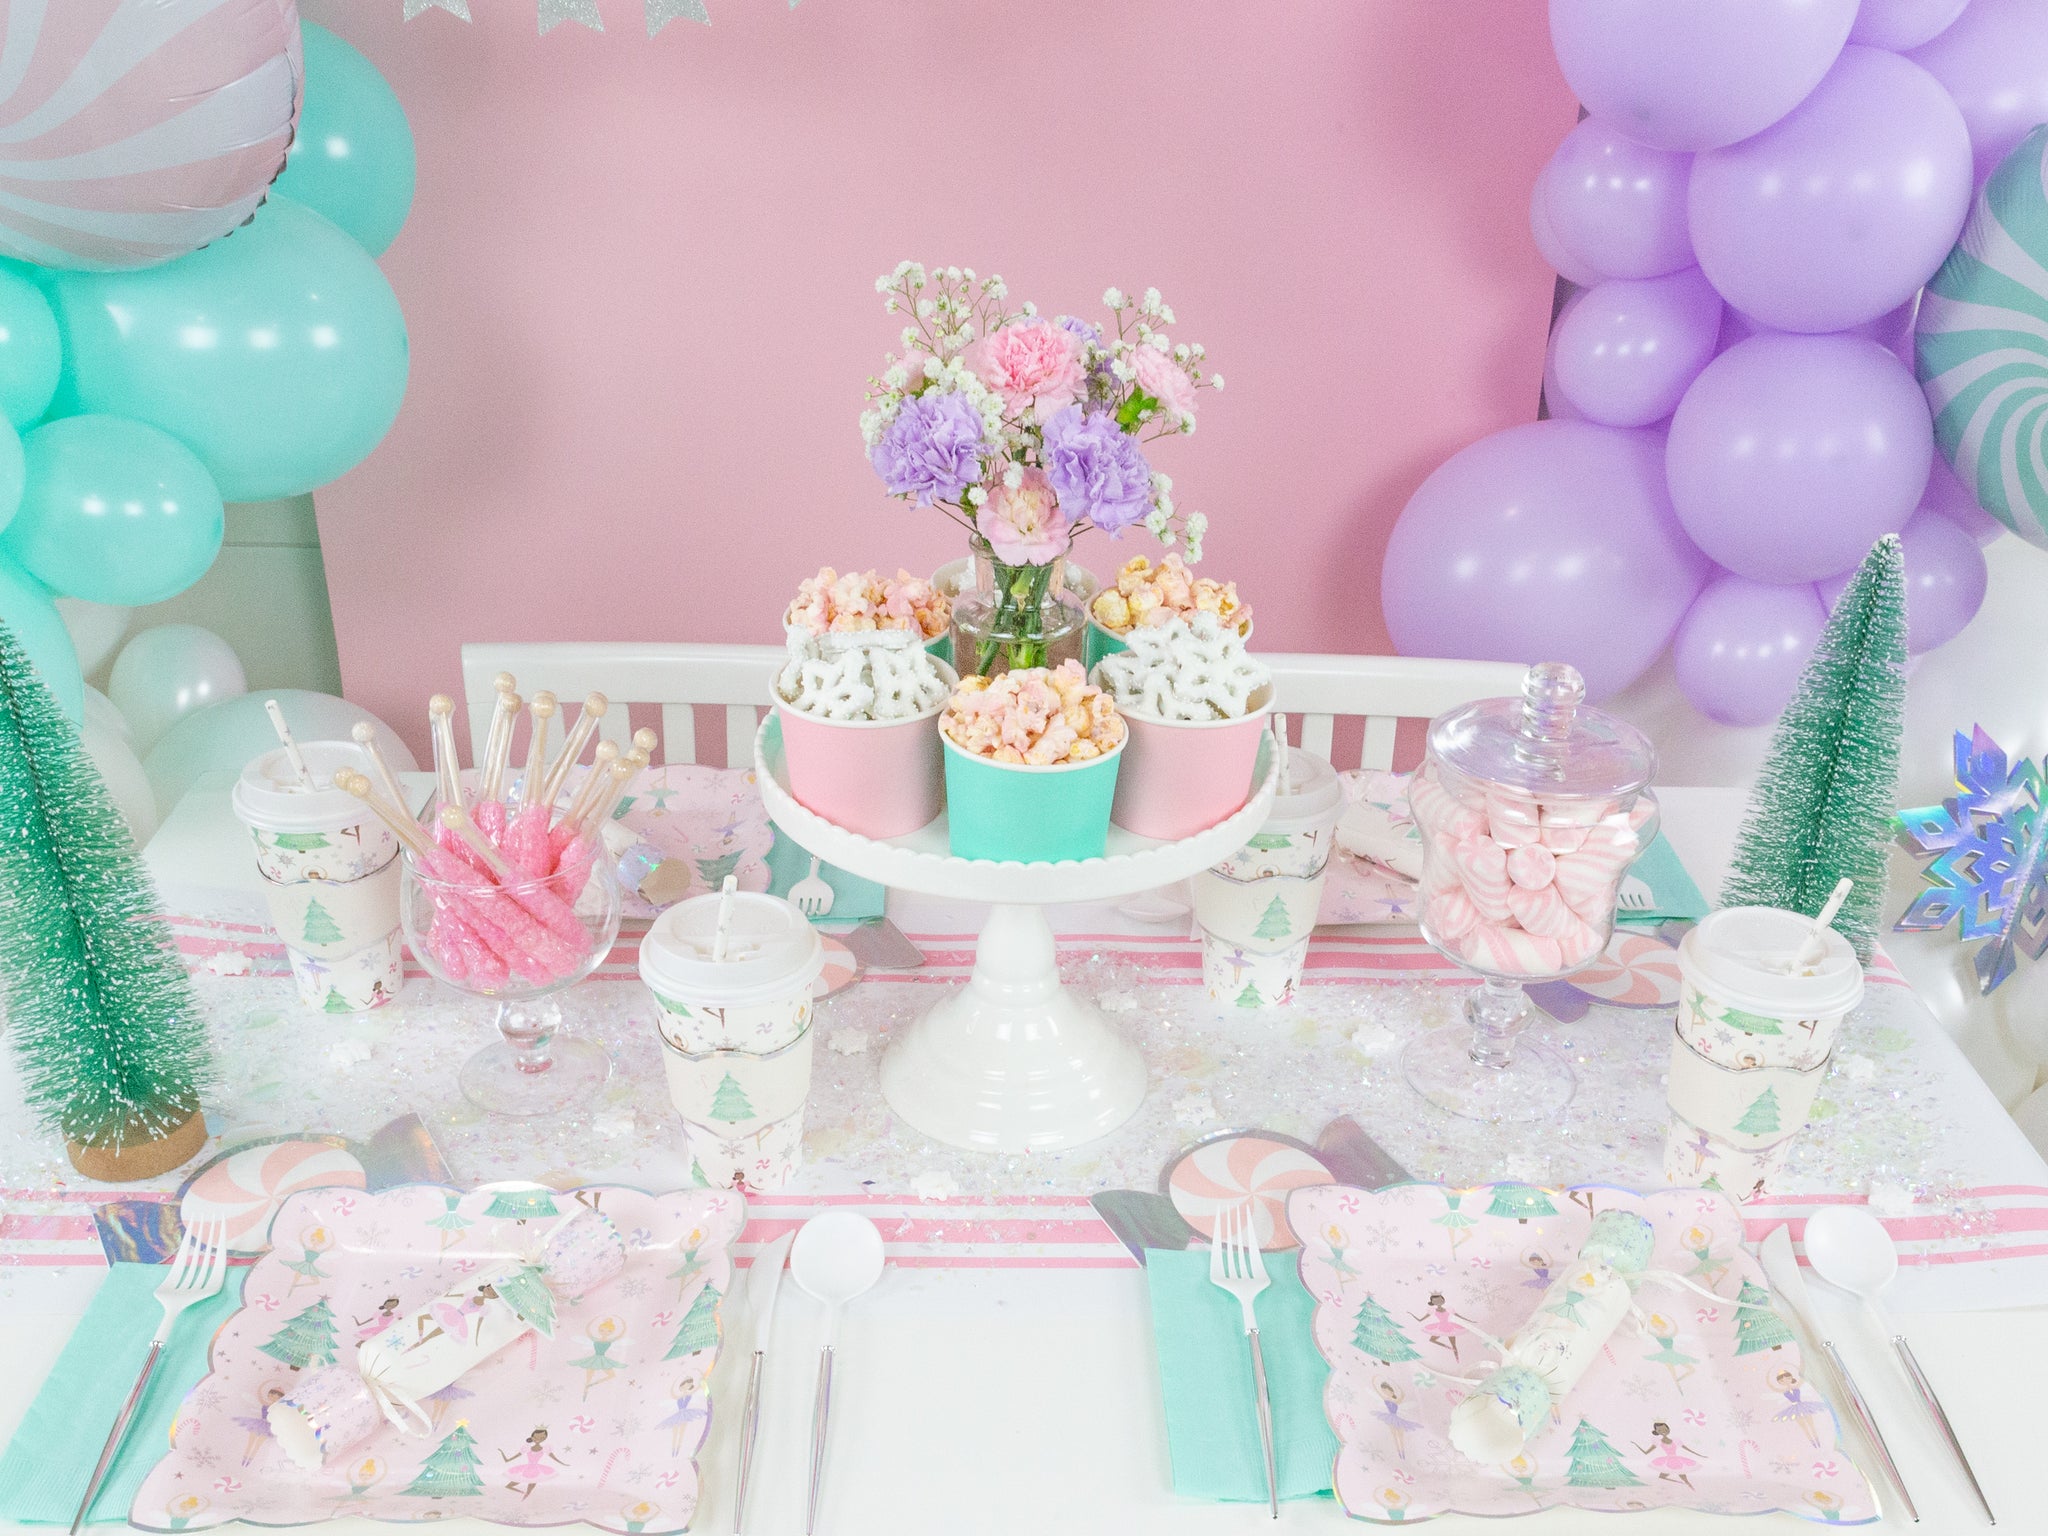 Sugar Plum Fairy Party Table Decor | The Party Darling